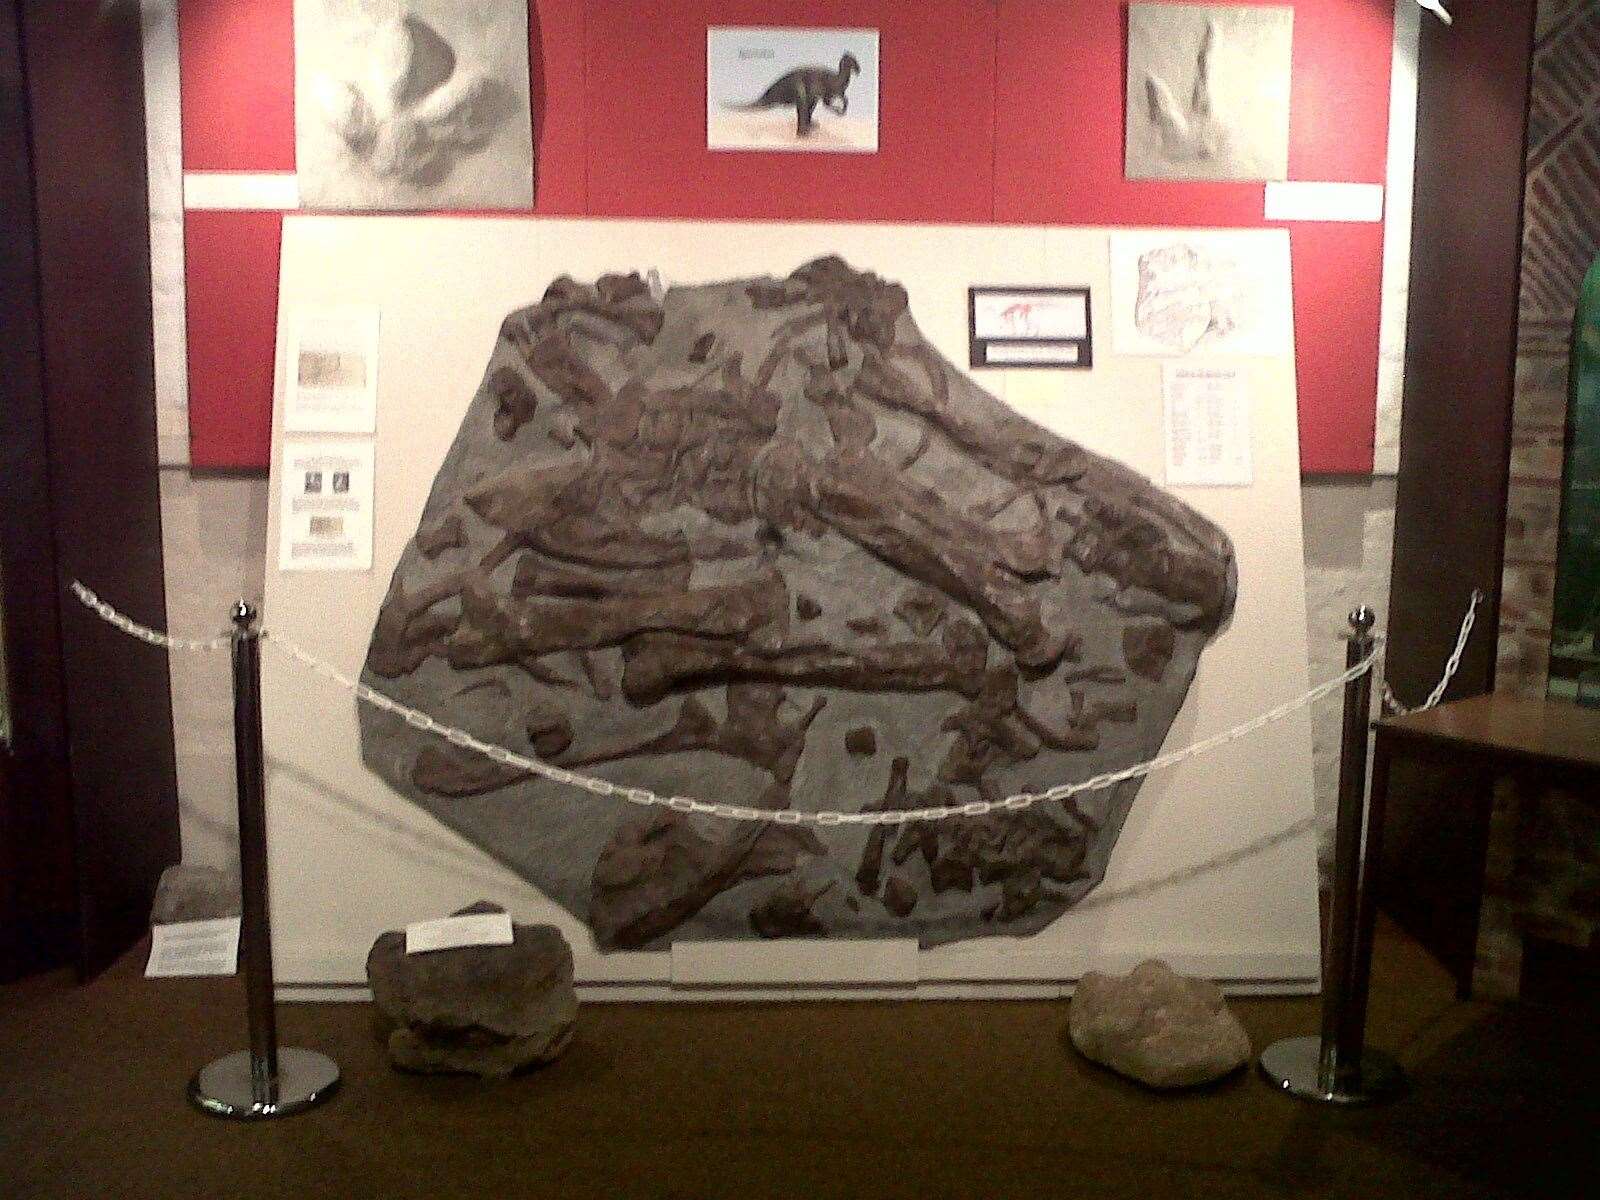 The 'Maidstone Slab', on display at the Natural History Museum, showing the dinosaur fossil. Picture: Georgina Llewellyn